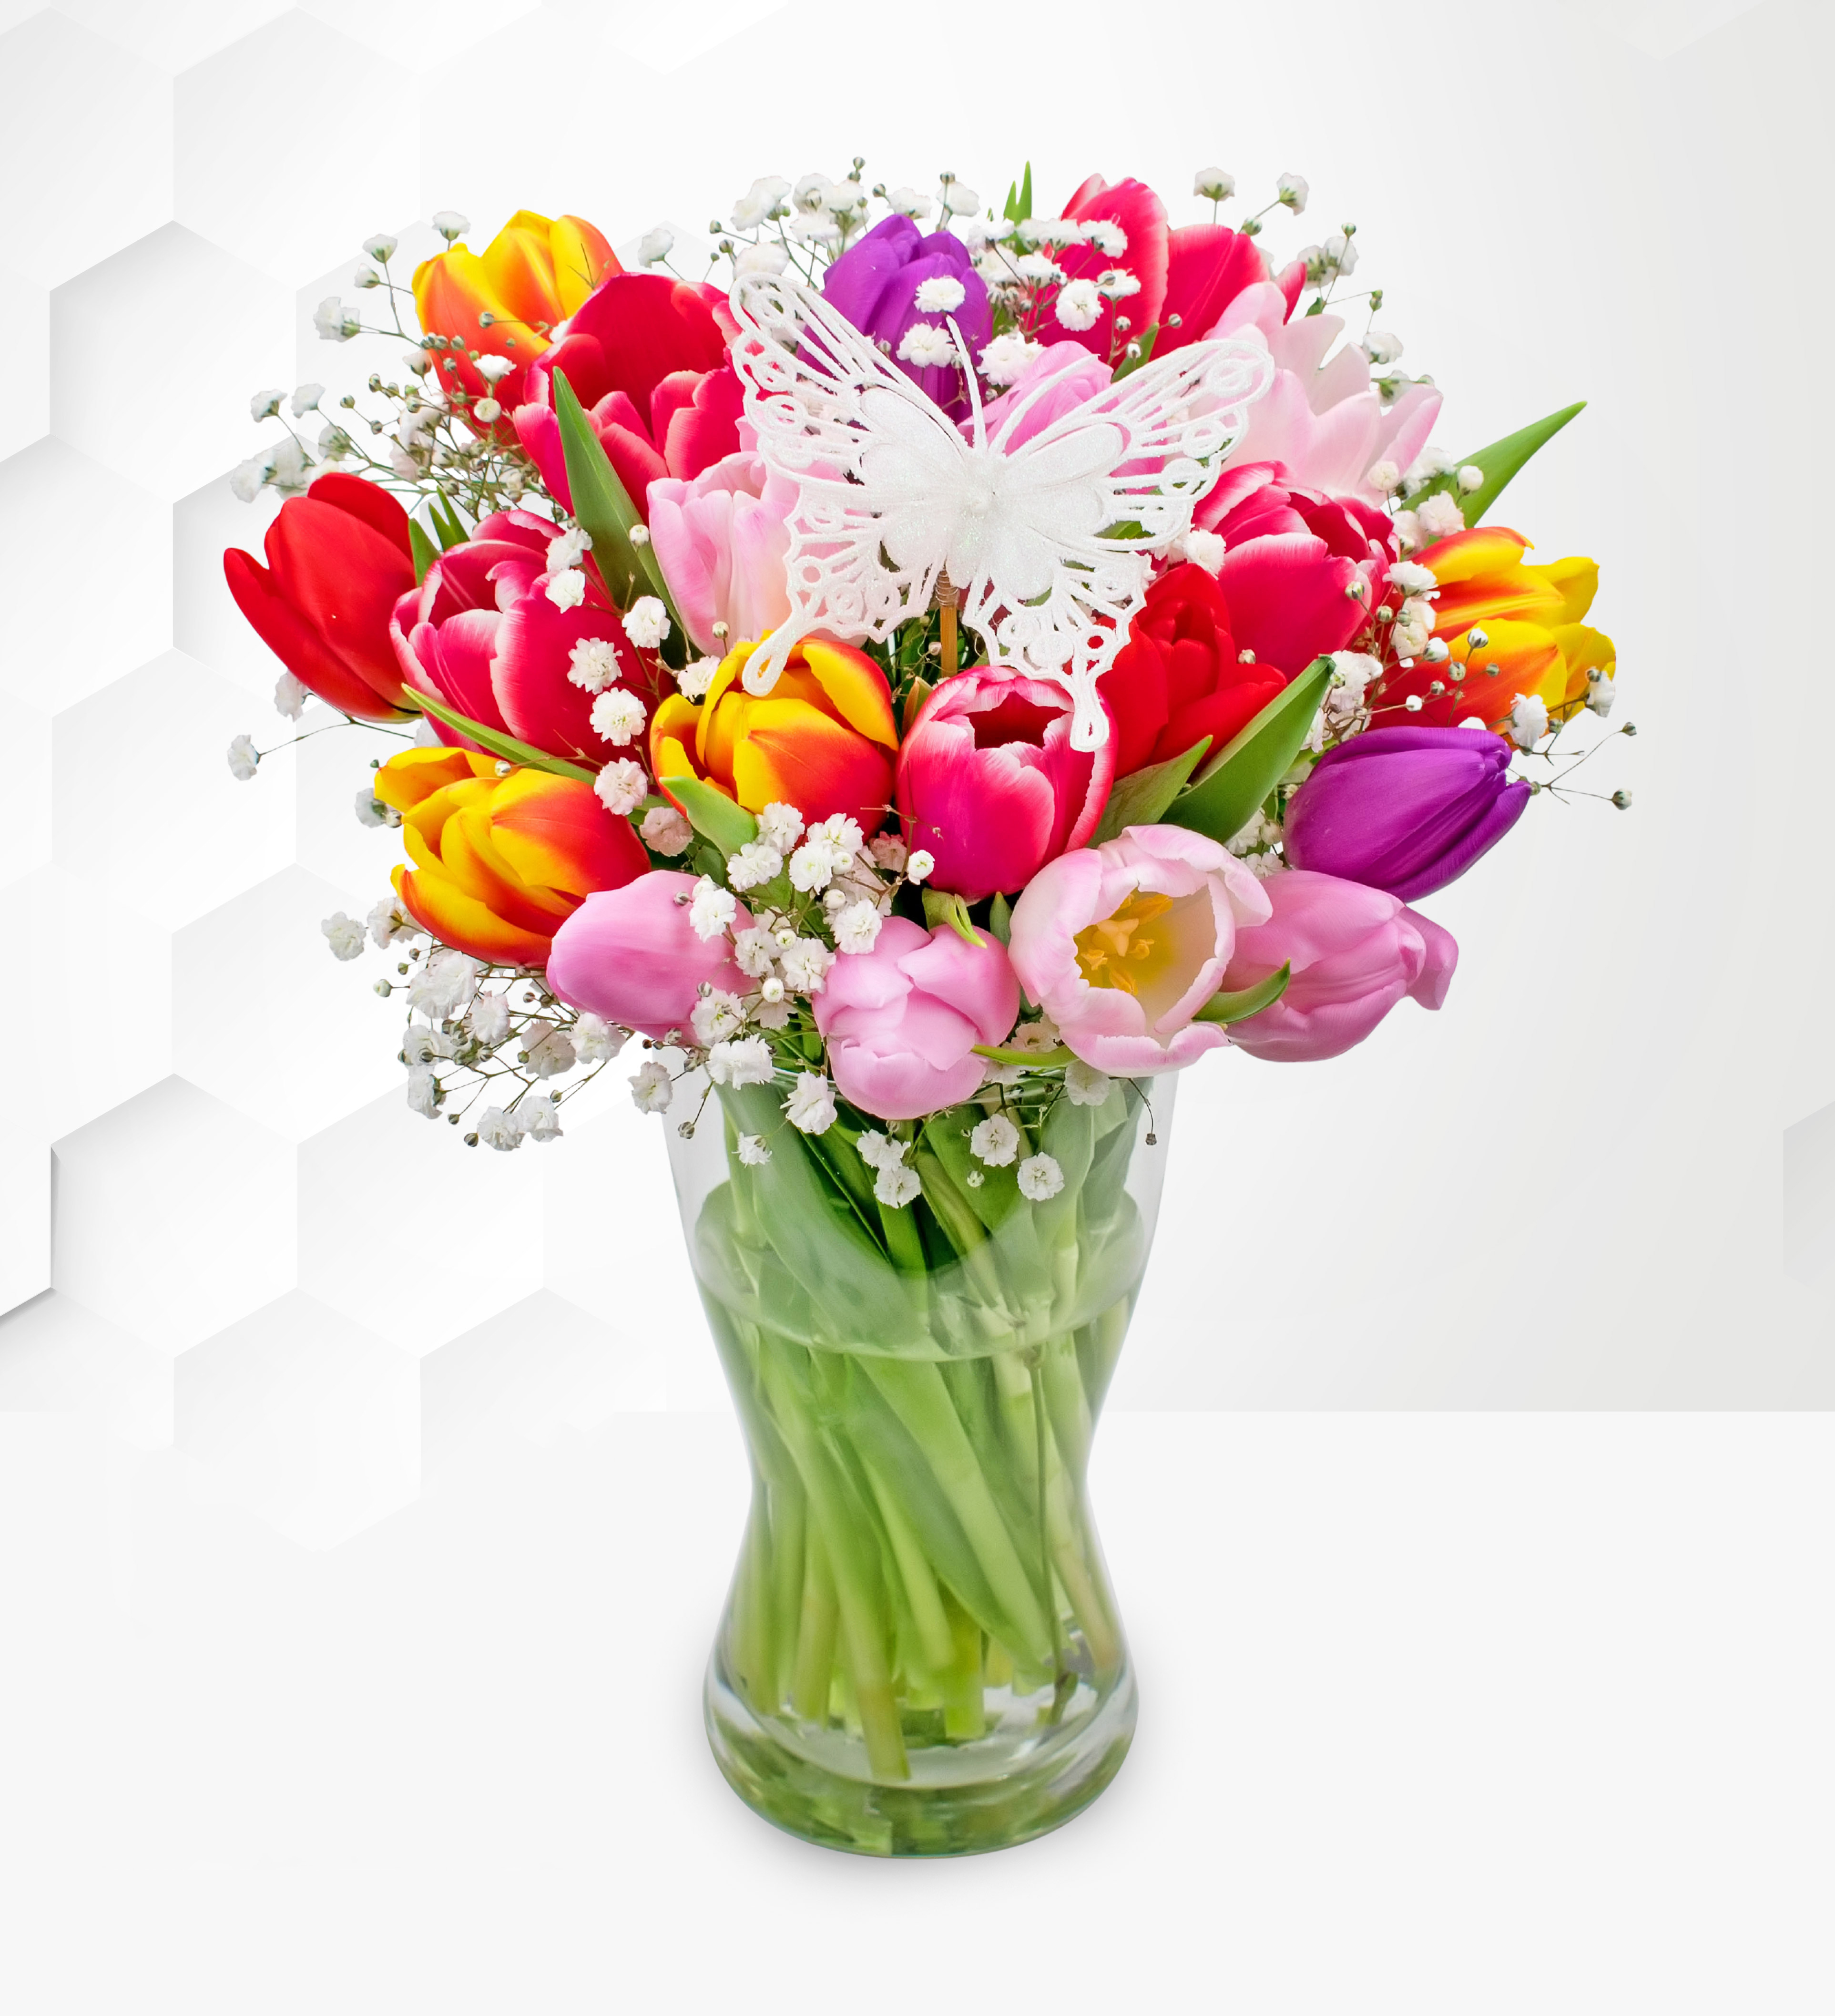 Tulip Supreme - Flower Delivery - Next Day Flower Delivery - Next Day Flowers - Flowers By Post - Send Flowers - Flowers